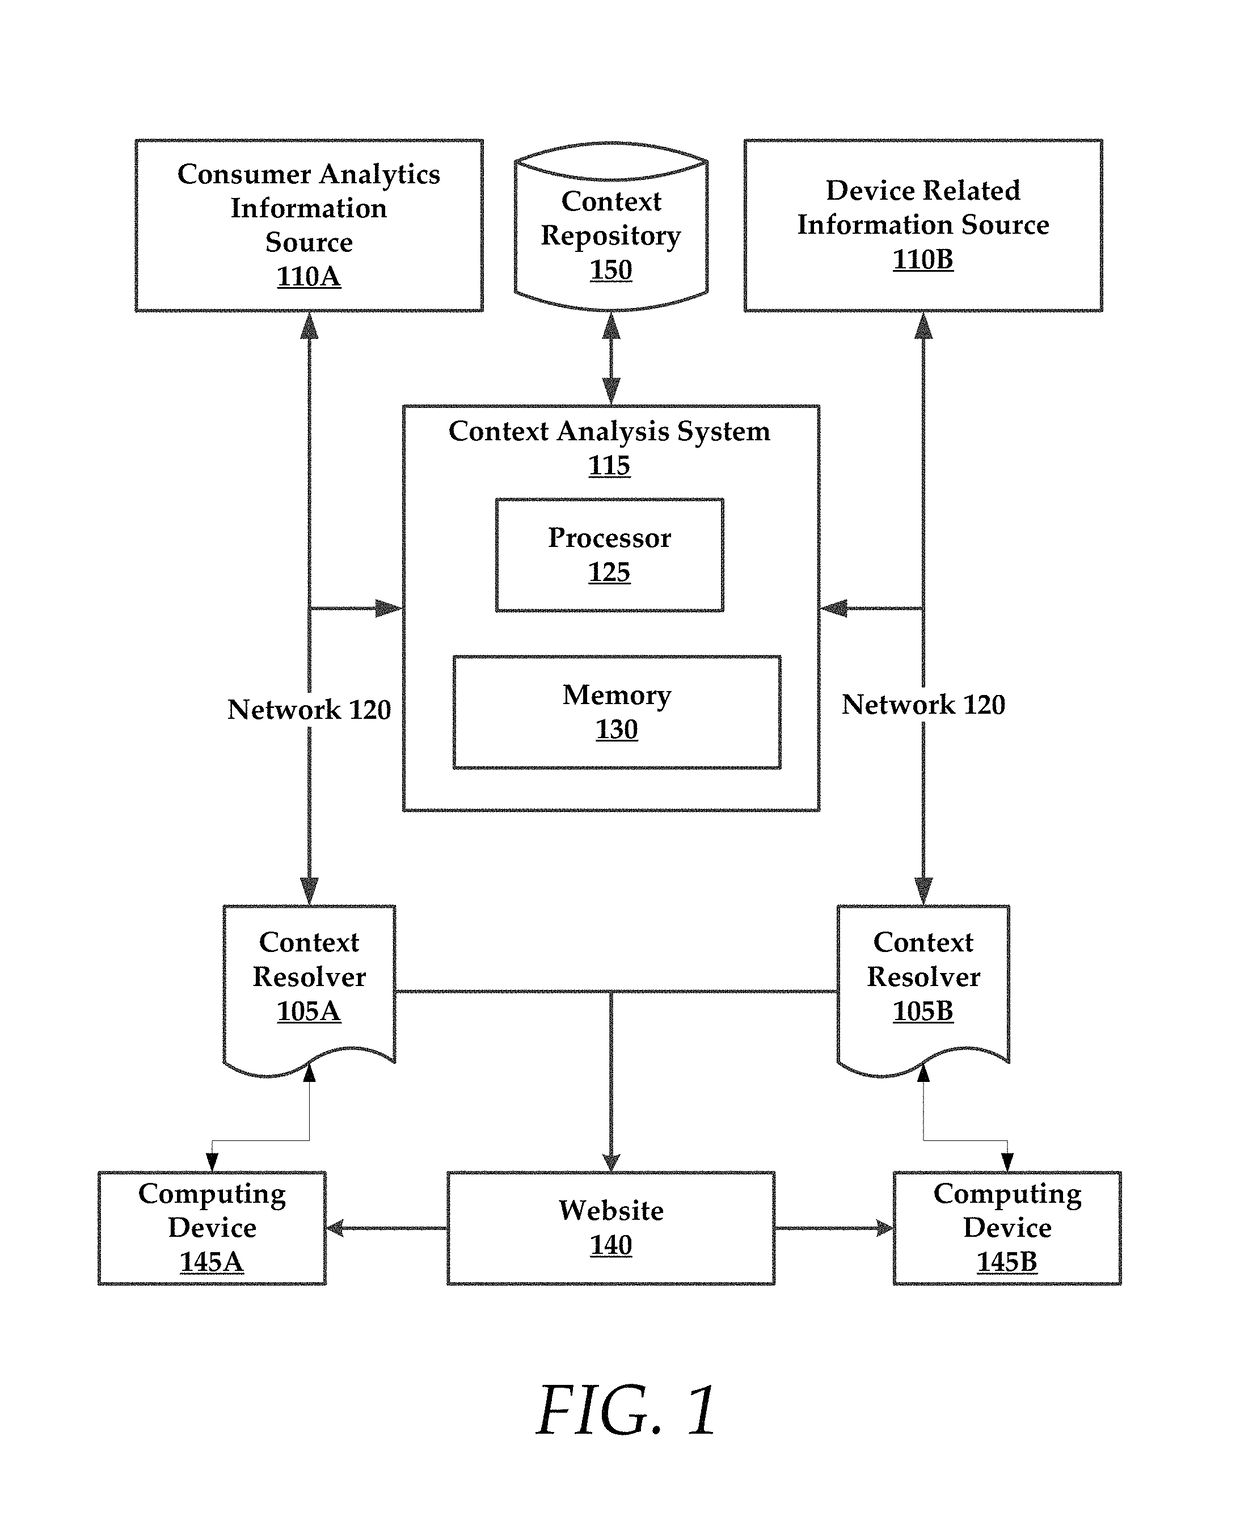 Systems and methods for contextual vocabularies and customer segmentation